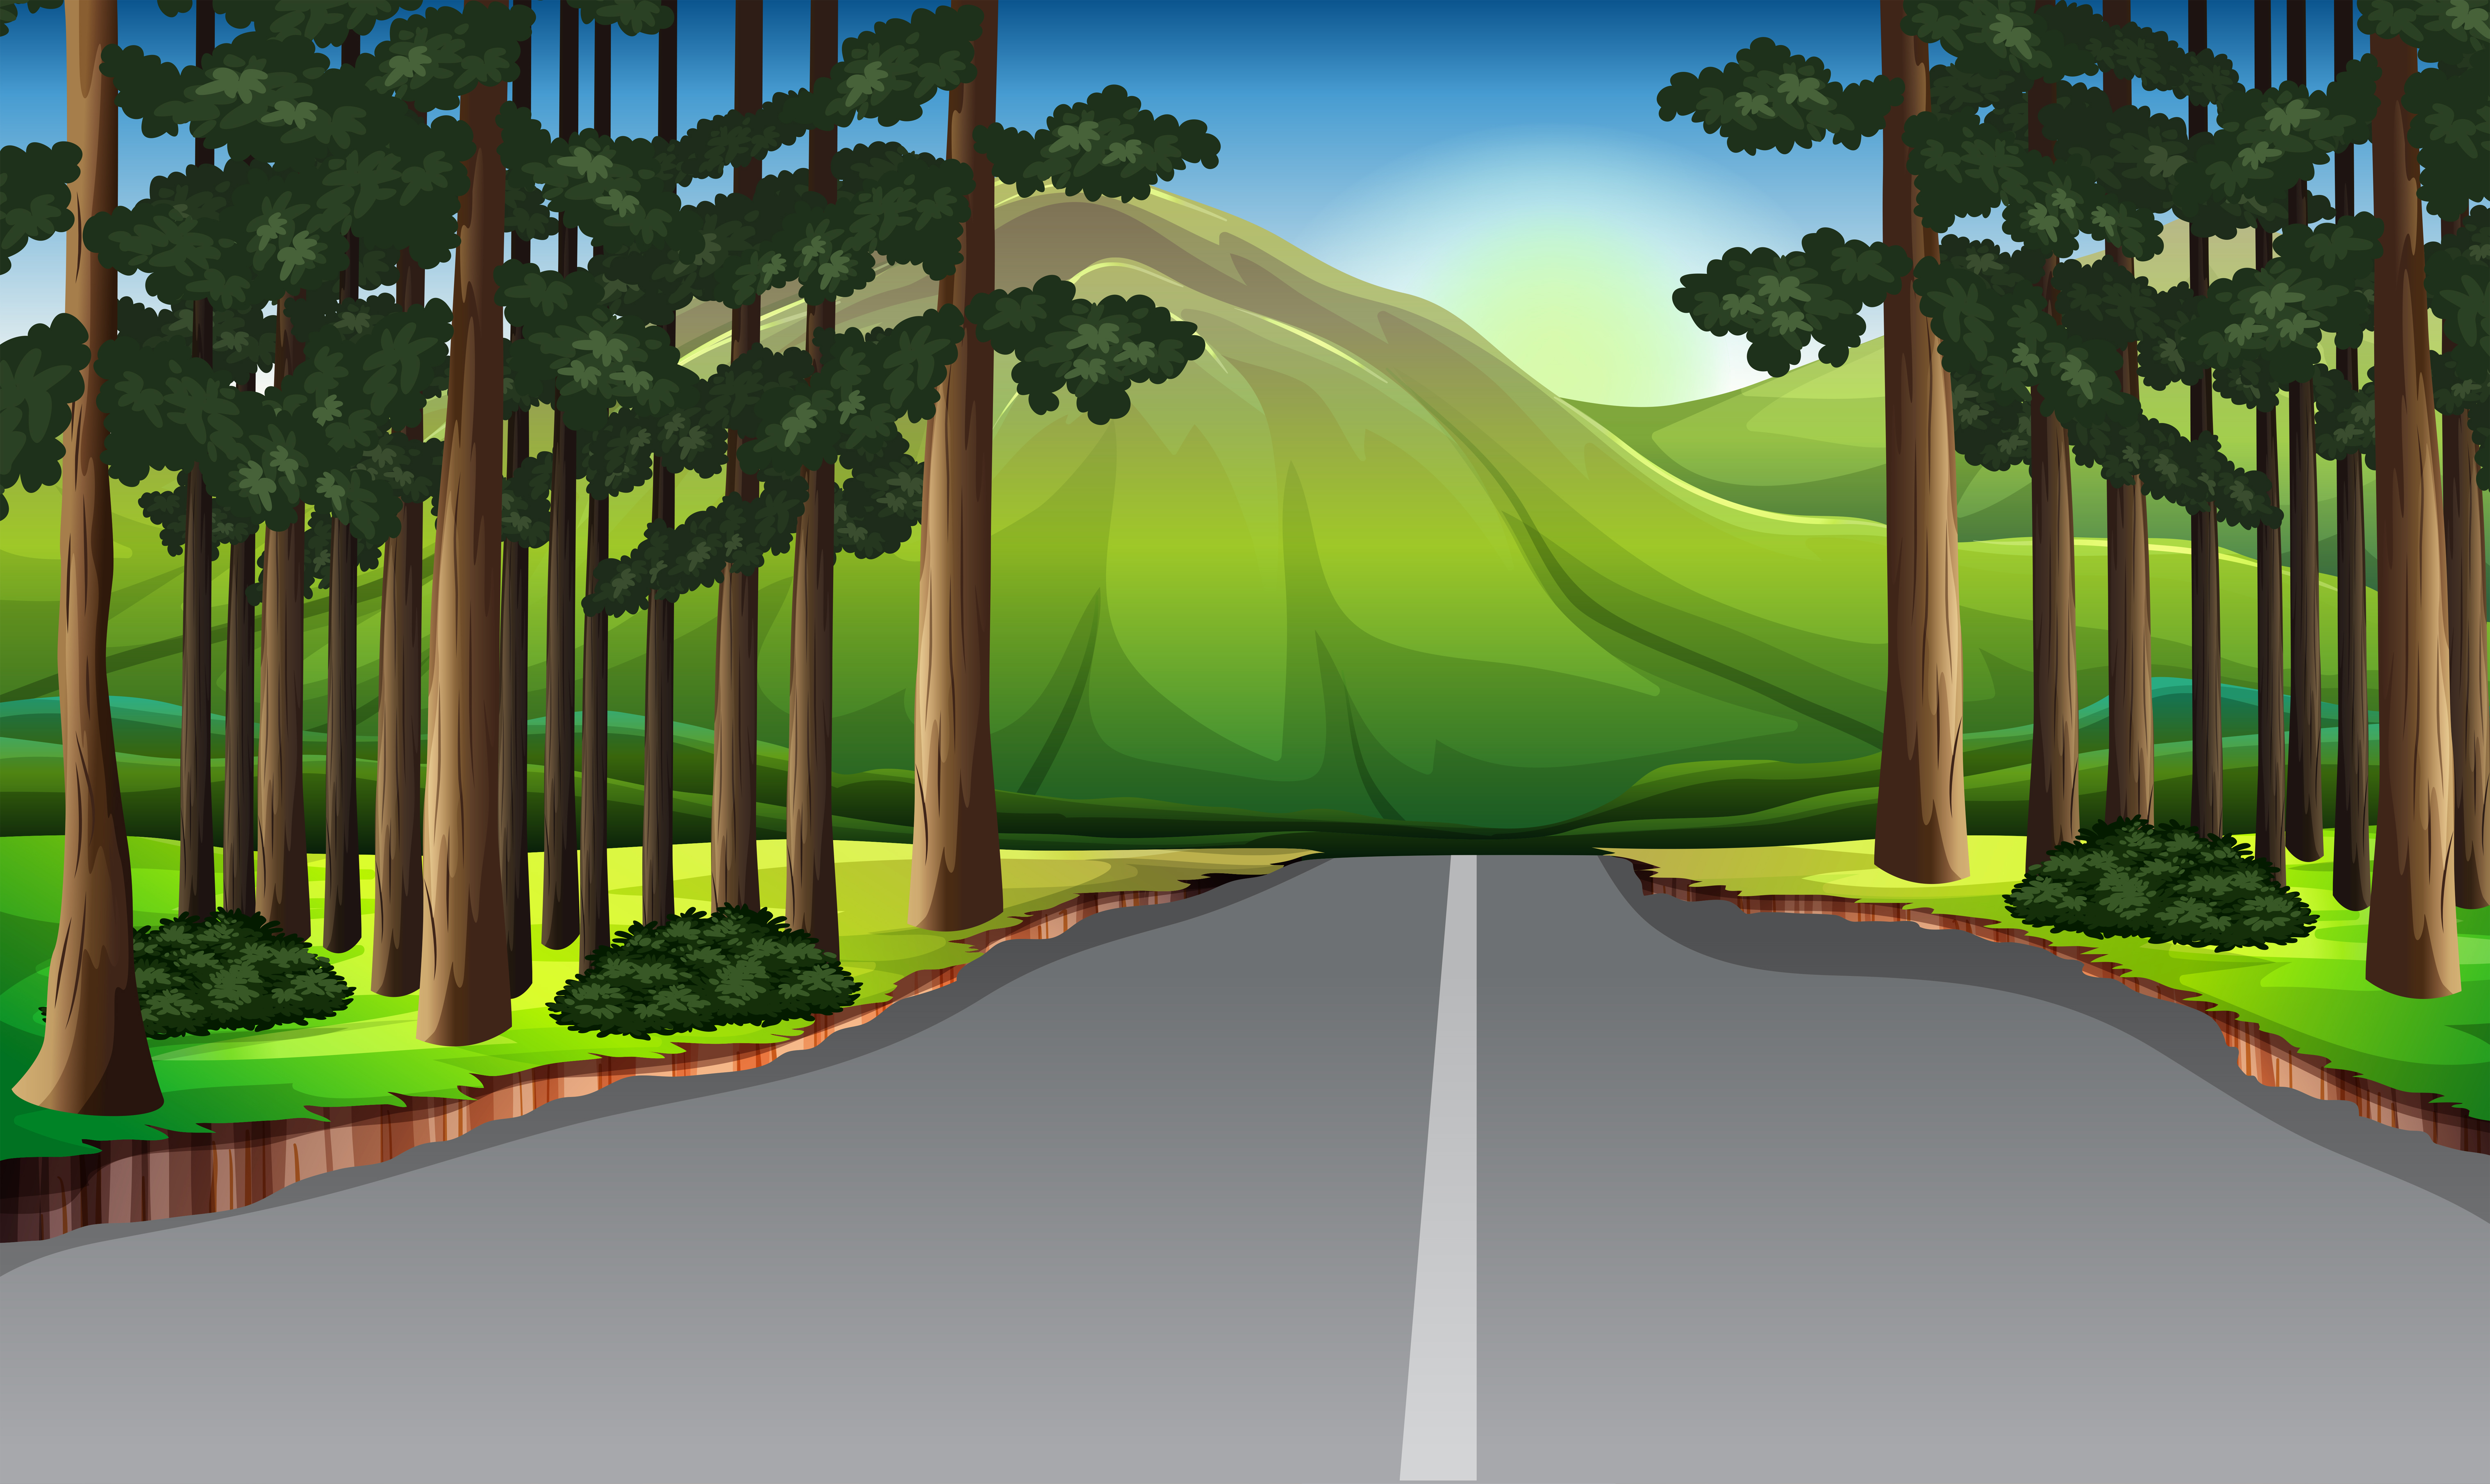 Background scene with trees along the road 298125 Vector Art at Vecteezy